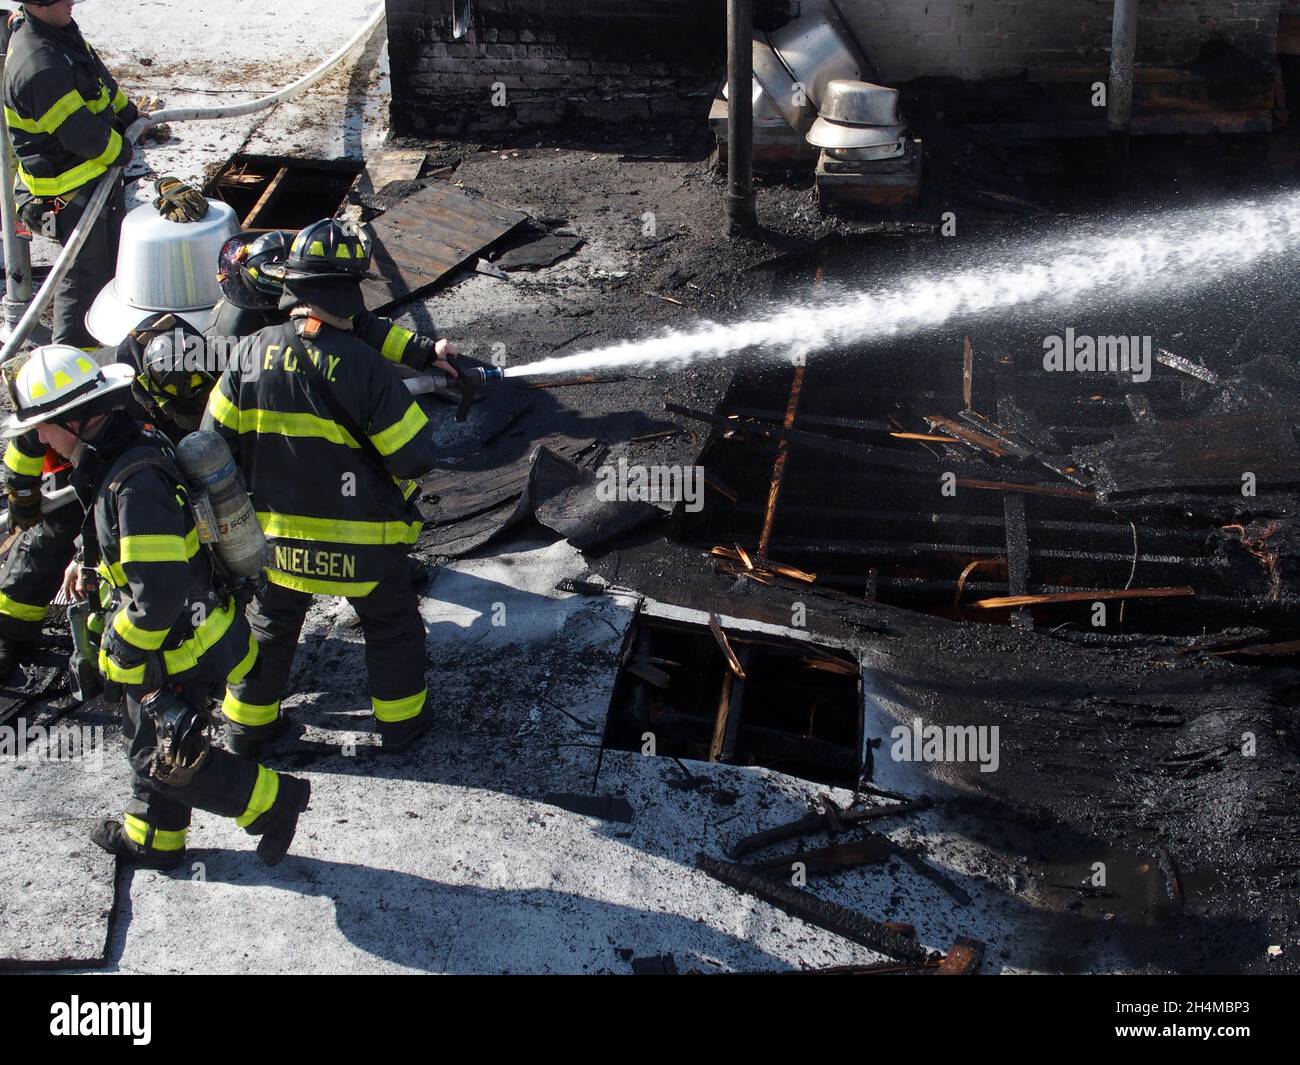 November 3, 2021, New York, New York, USA: New York, A 4 alarm fire erupted in the Flabush section of Brooklyn N.Y. Firemen battled the blaze for three hours until it was put under control, about 240 firemen and Emergency Medical  Service Workers were on scene to battle the blaze. The Chief of the New York Fire Department was asked if the recent NYC  Covid vaccine mandate affected response time his response '' No it did Not. (Credit Image: © Bruce Cotler/ZUMA Press Wire) Stock Photo